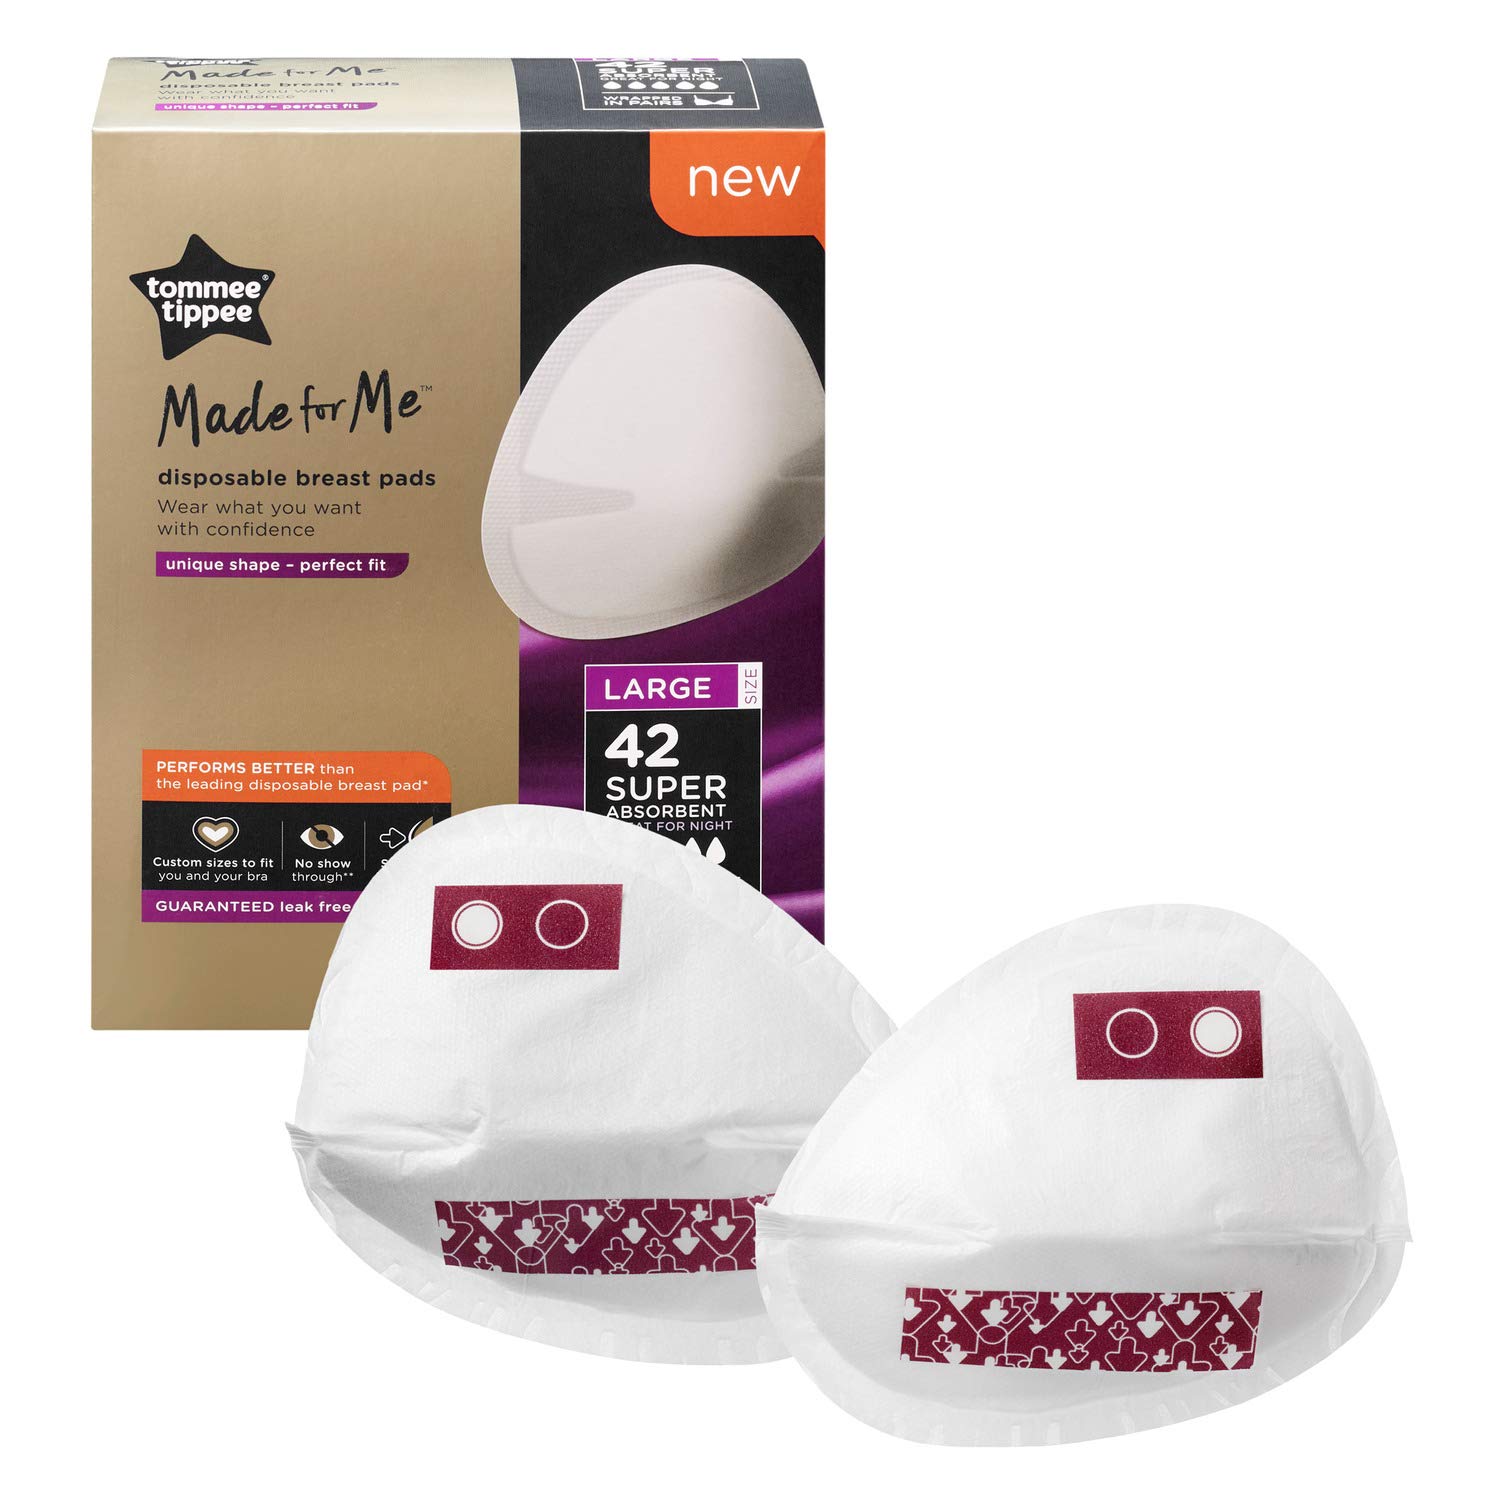 Tommee Tippee Made for Me Super Absorbent Disposable Breast Pads, Soft, Leak-Free, Contoured Shape, Adhesive Patch, Large, Pack of 42